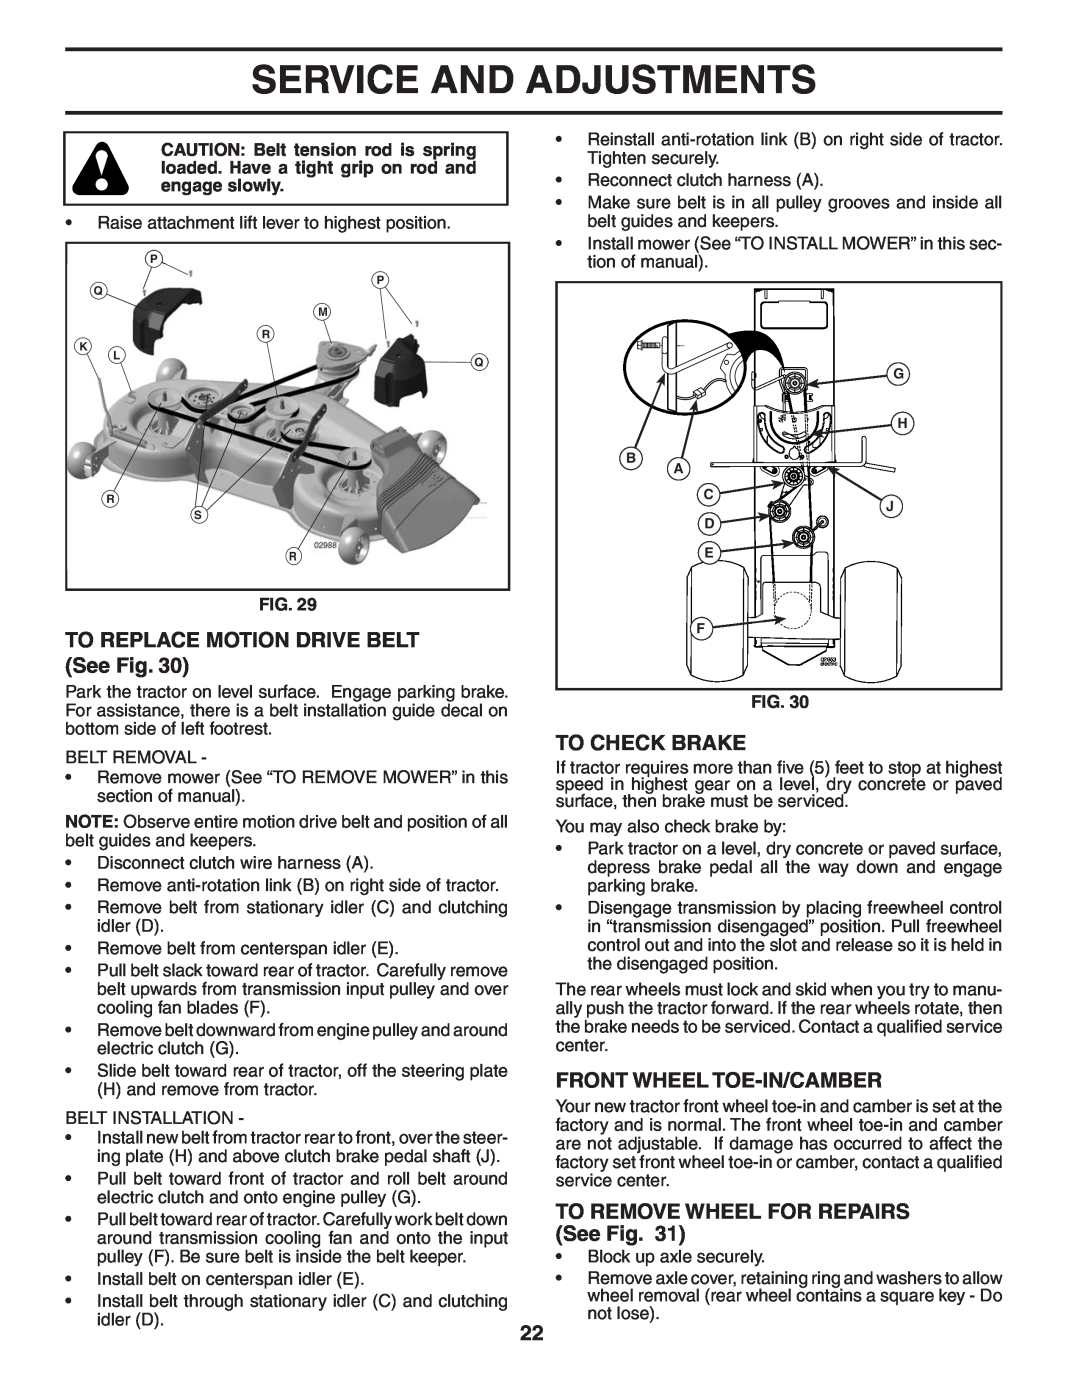 Husqvarna YTH2448T owner manual TO REPLACE MOTION DRIVE BELT See Fig, To Check Brake, Front Wheel Toe-In/Camber 